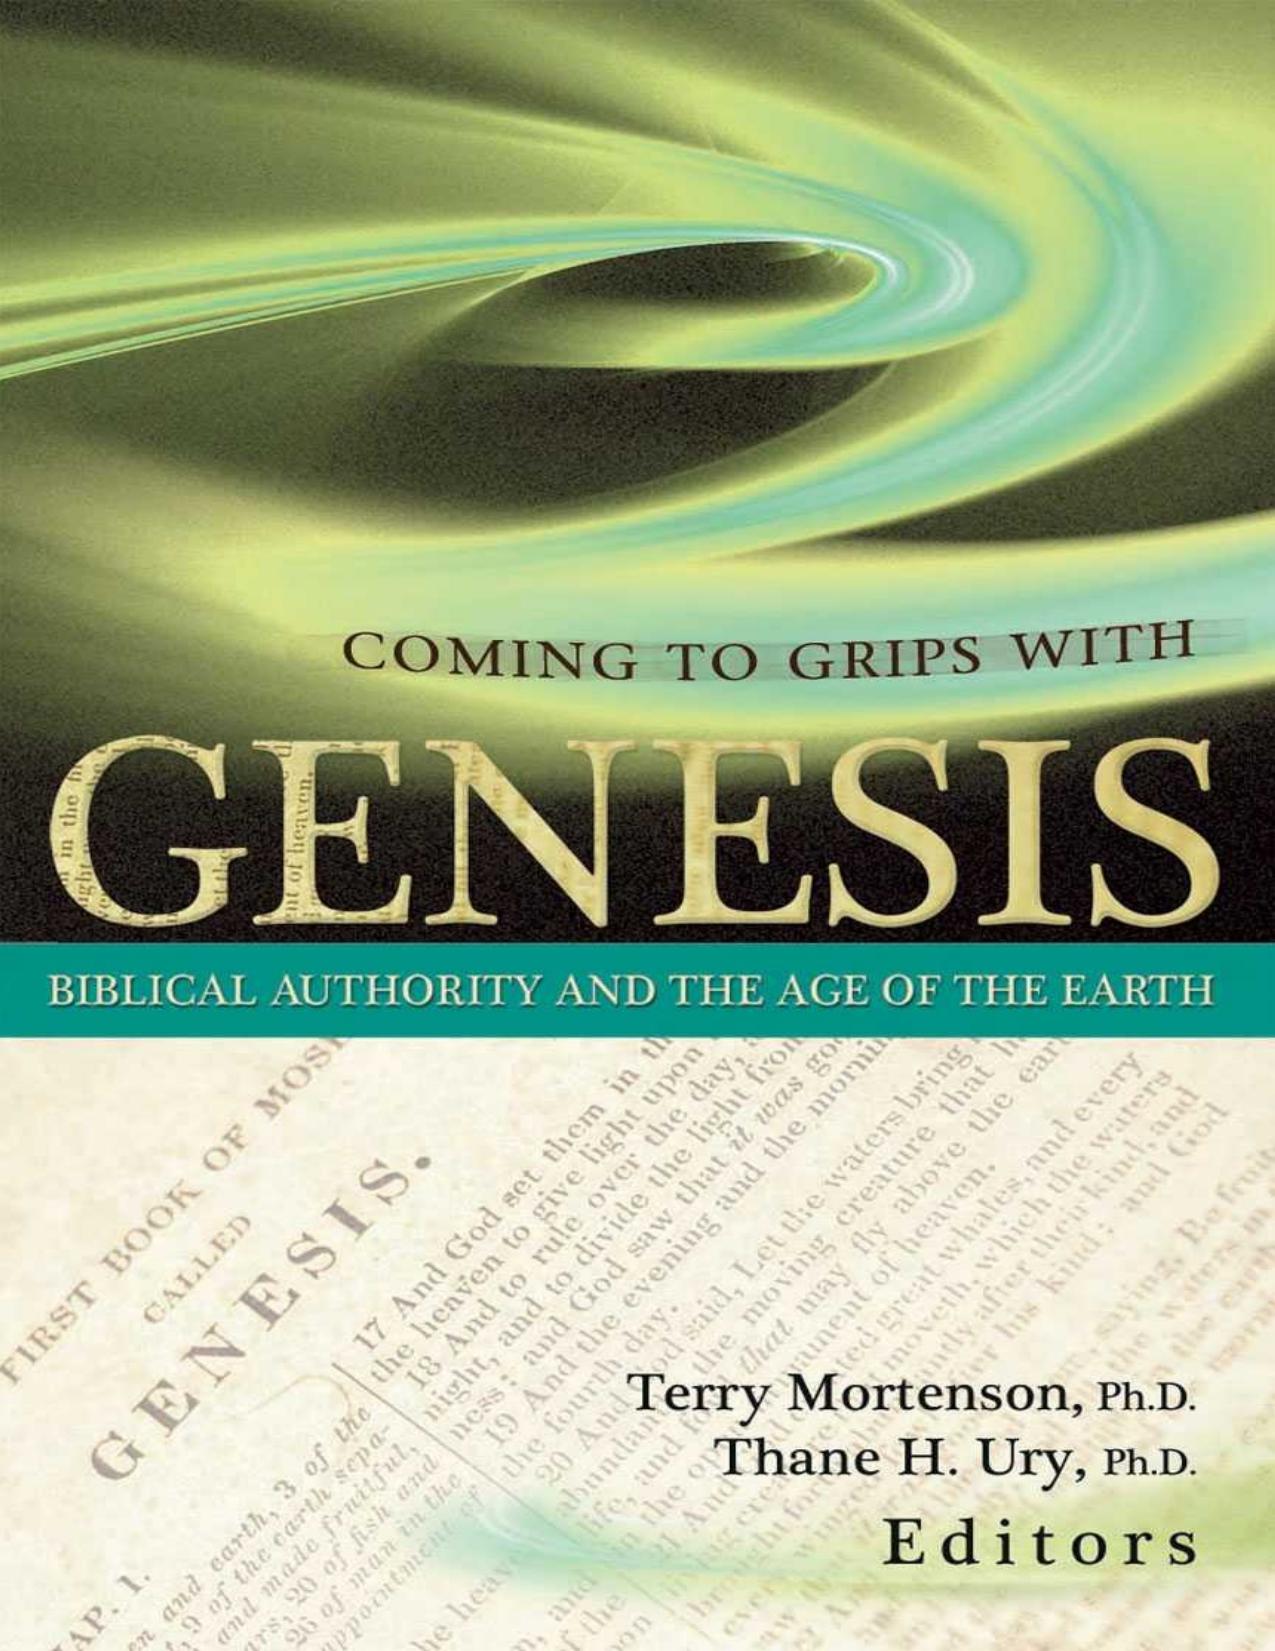 Coming to Grips with Genesis by Coming to Grips & Genesis. Biblical Authority & the Age of the Earth (2008)